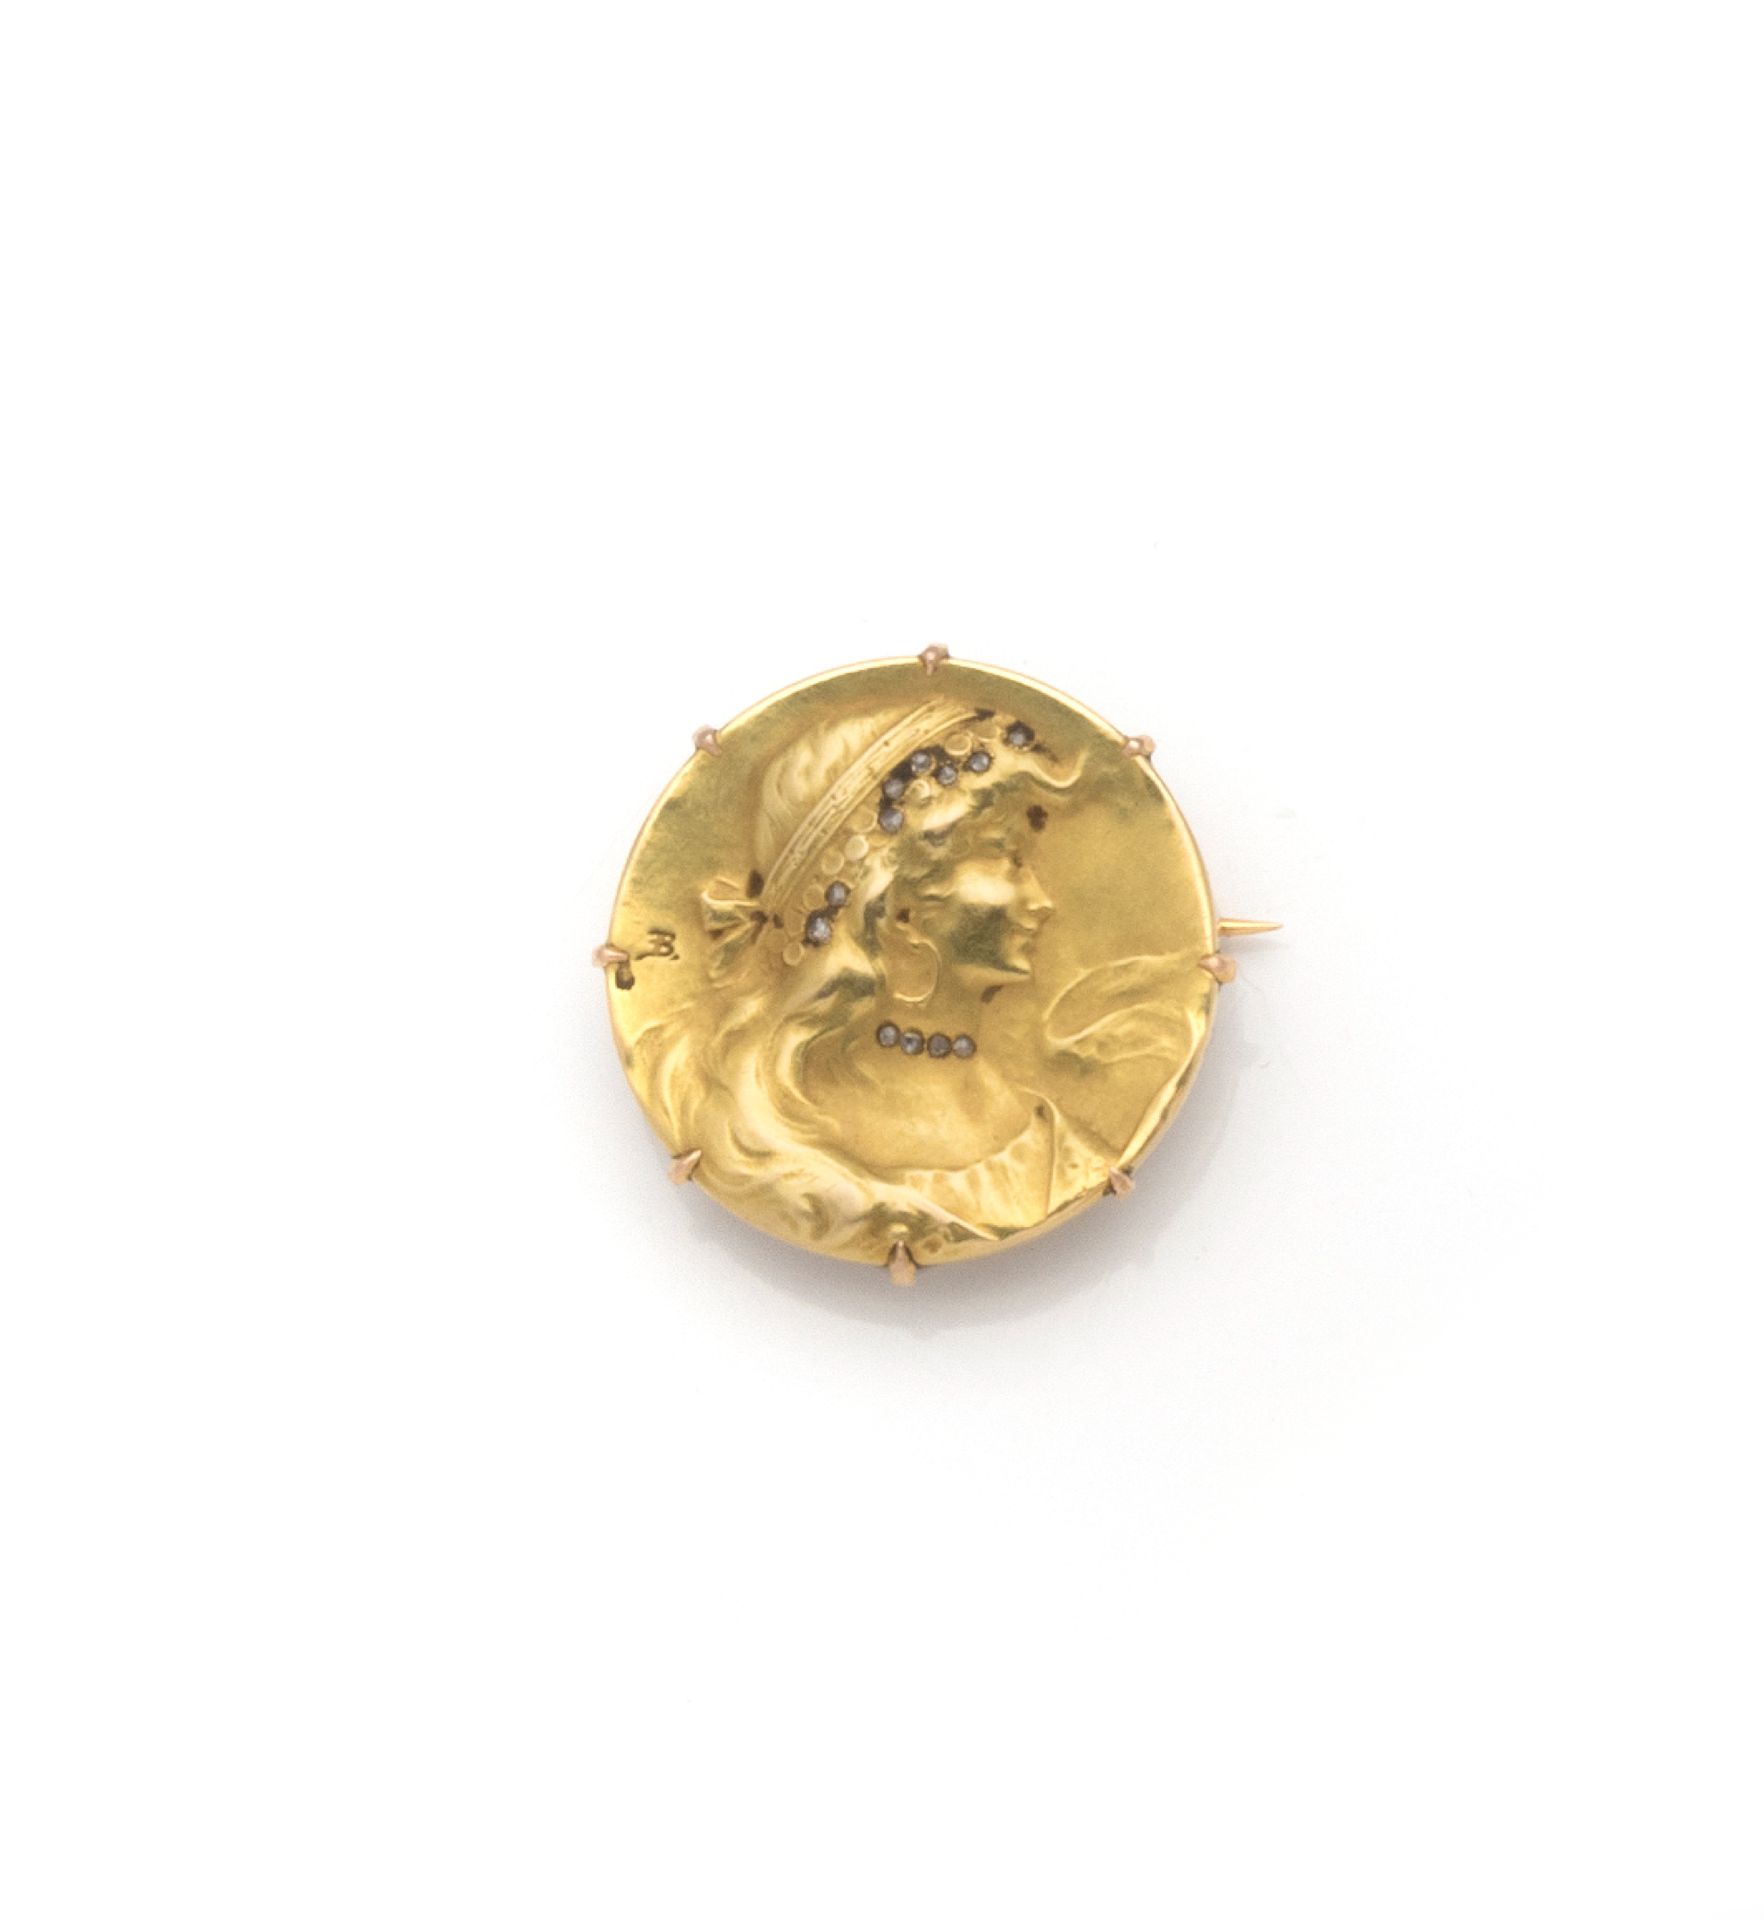 Null Round brooch in 18K yellow gold (750/1000) adorned with a medal representin&hellip;